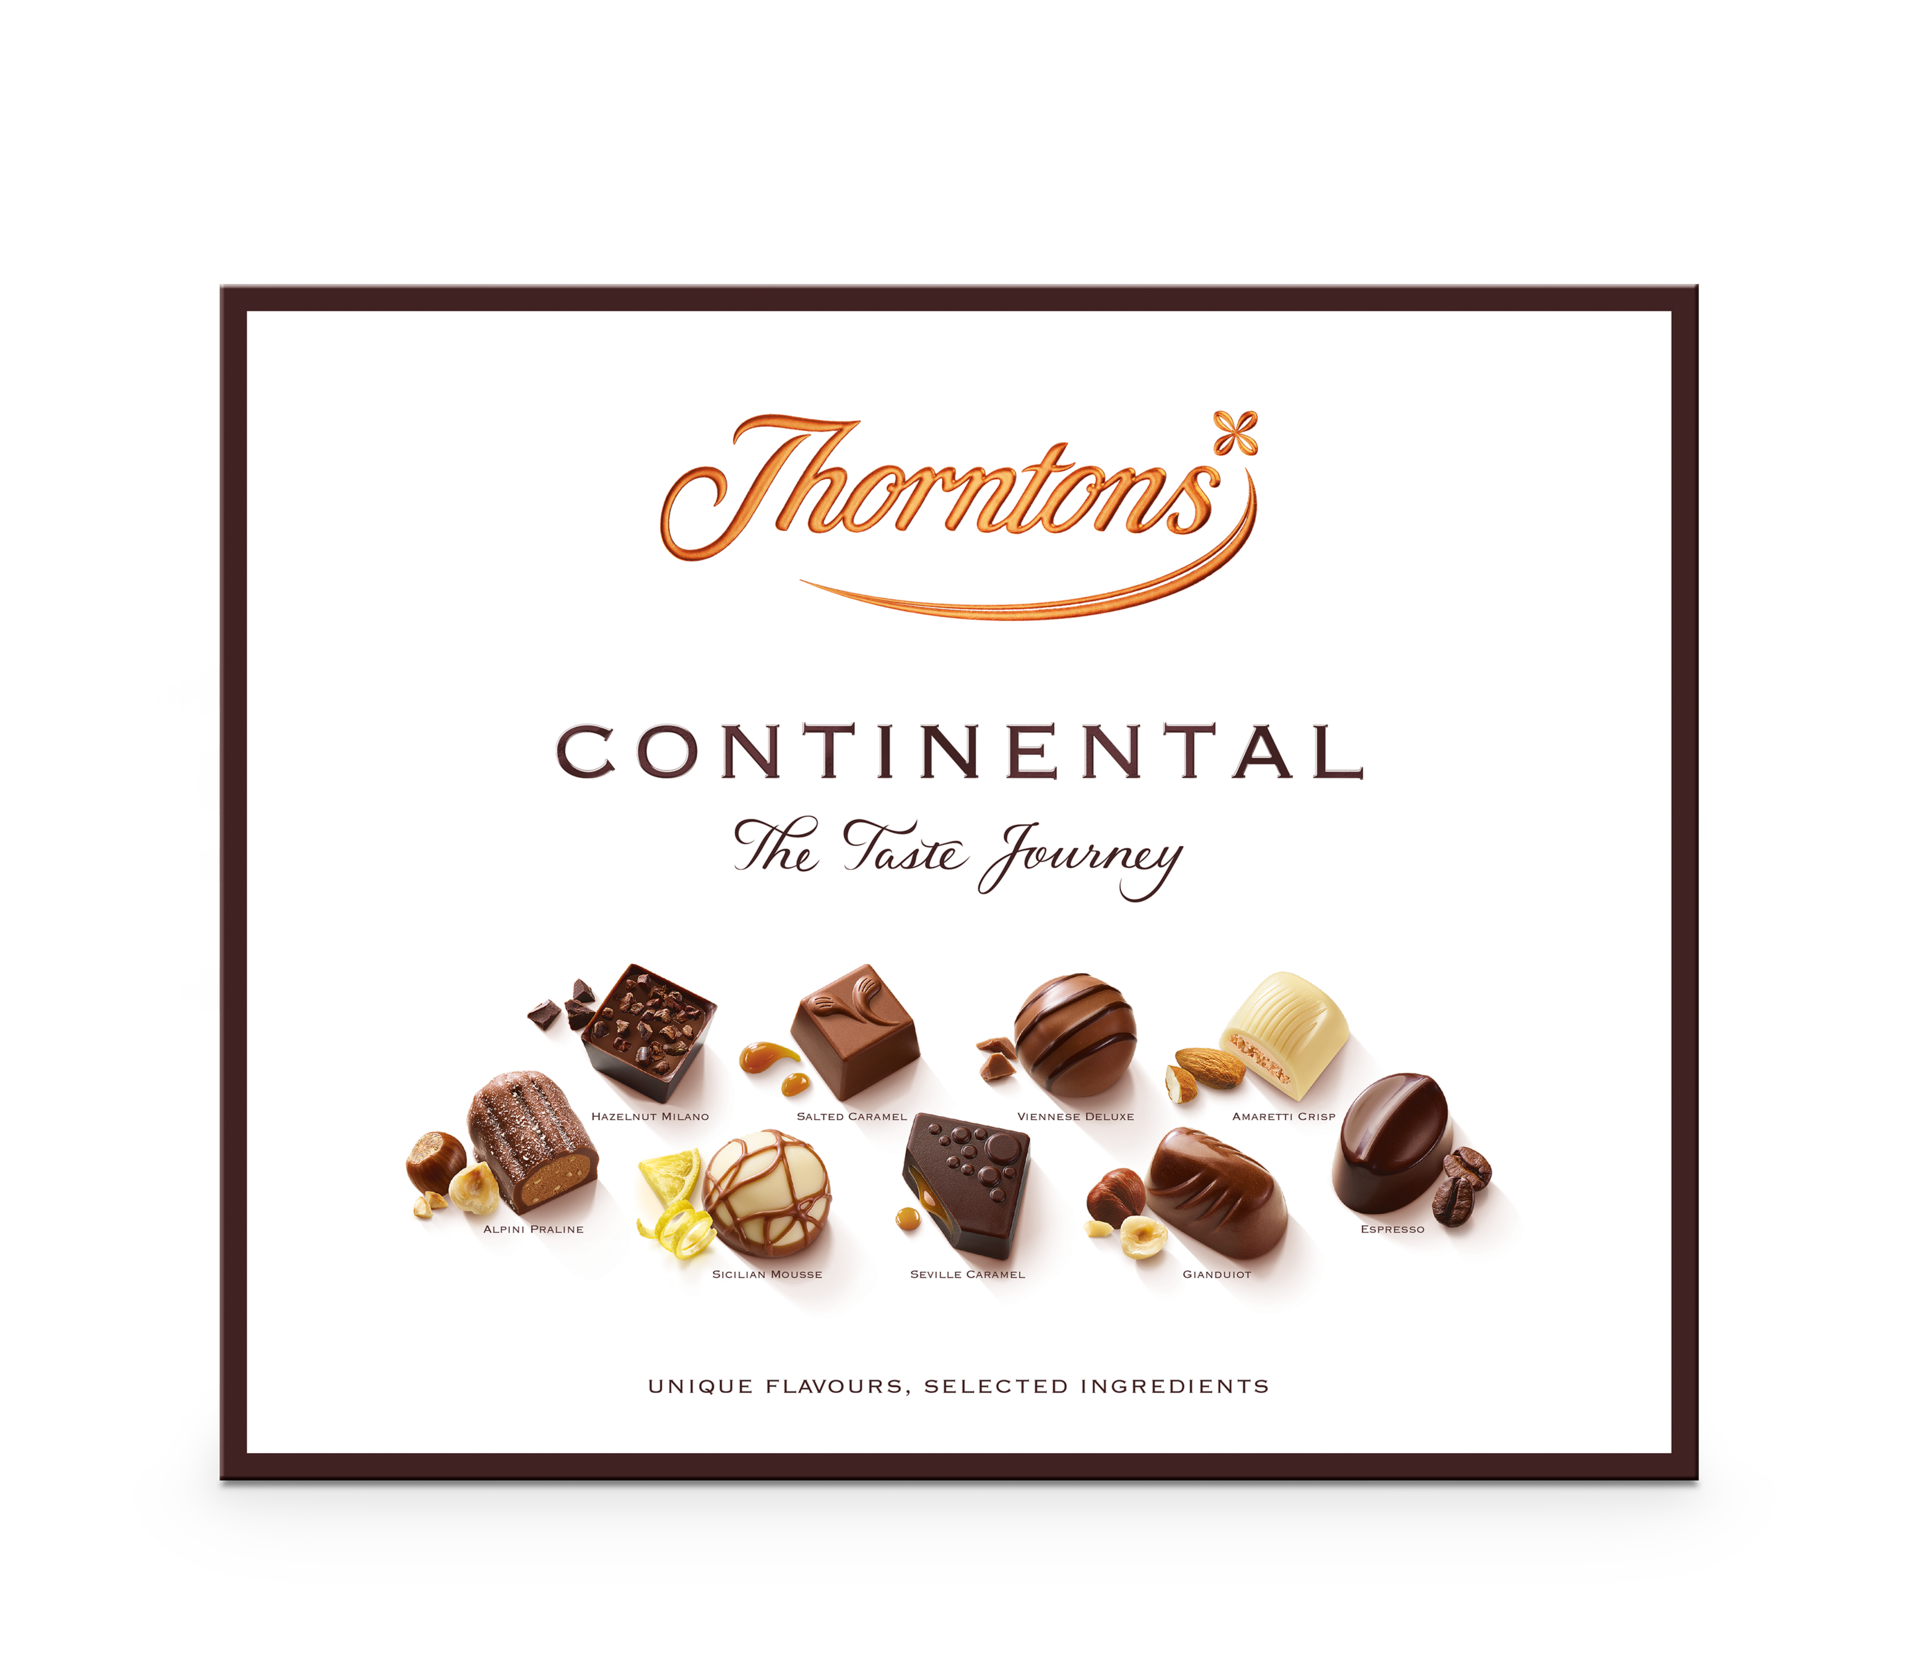 https://www.thorntons.com/medias/sys_master/images/hf0/h00/8916765507614/77229486_main/77229486-main.png?resize=xs-s-xs